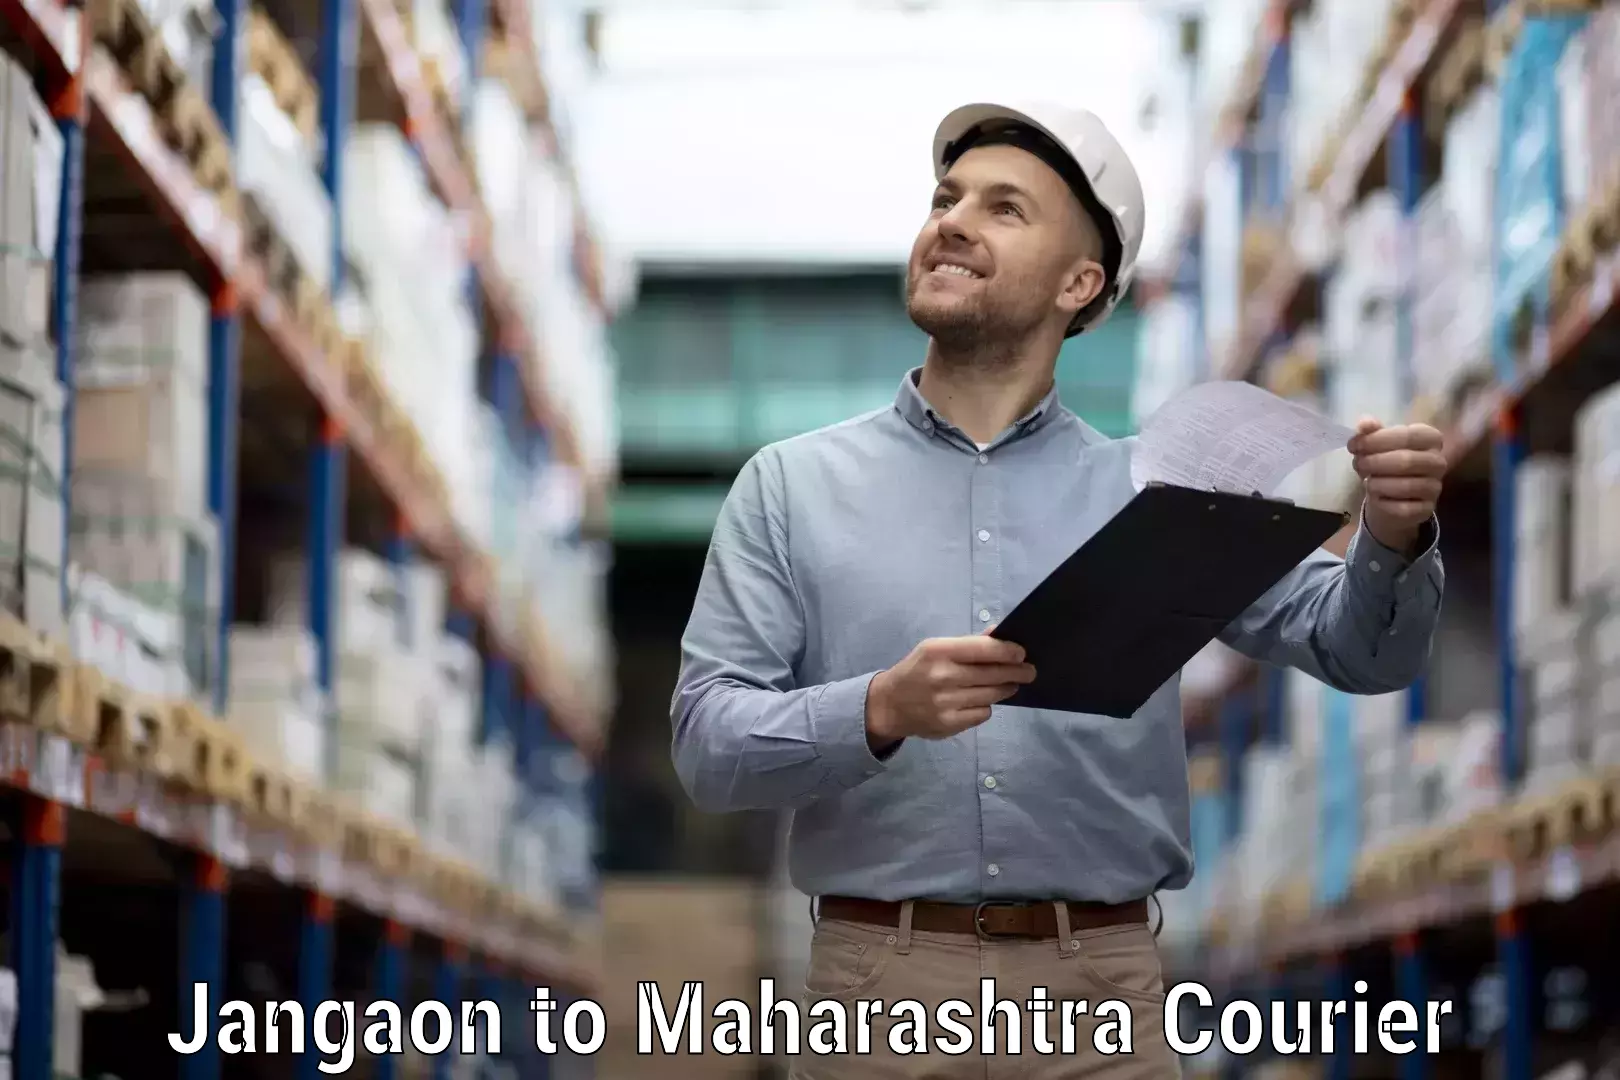 Next-day delivery options Jangaon to Tata Institute of Social Sciences Mumbai